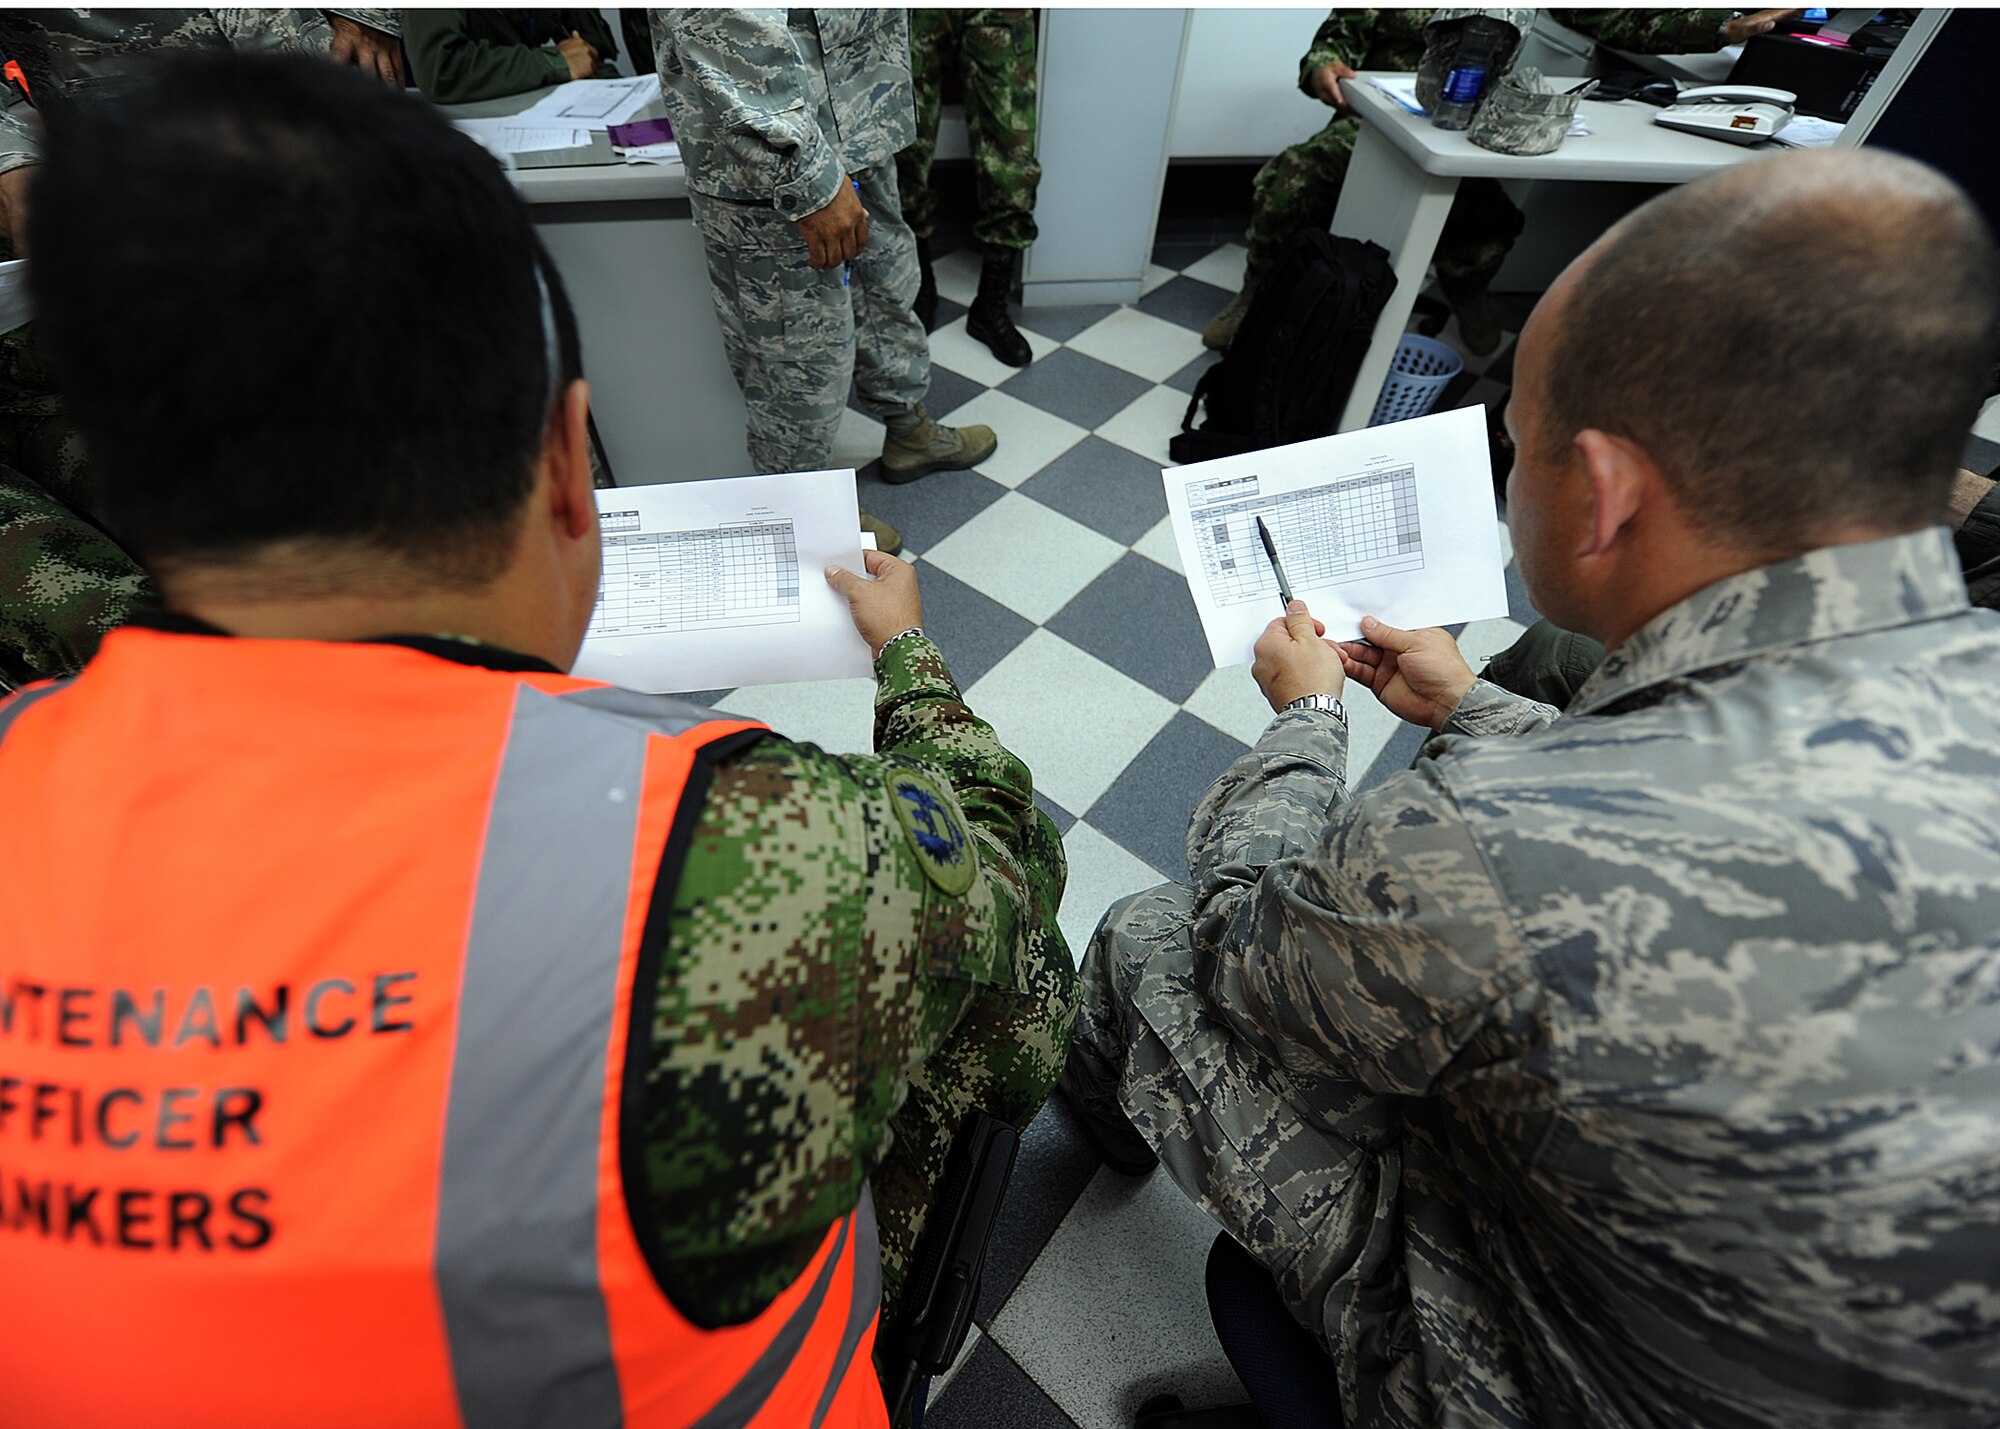 Major Carlos Gutierrez, Colombian air force Centro Administrativa Nacional Logistics officer, and Maj. Brian Symon, 571st MSAS Colombia mission commander, look over the Colombian air force aircraft status report during the maintenance operations center briefing for senior leadership June 14, at Comando Aéreo de Combate No. 1 base, Palanquero, Colombia, as part of a month-long Air Mobility Command Building Partner Capacity mission. (U.S. Air Force photo by Tech. Sgt. Lesley Waters)